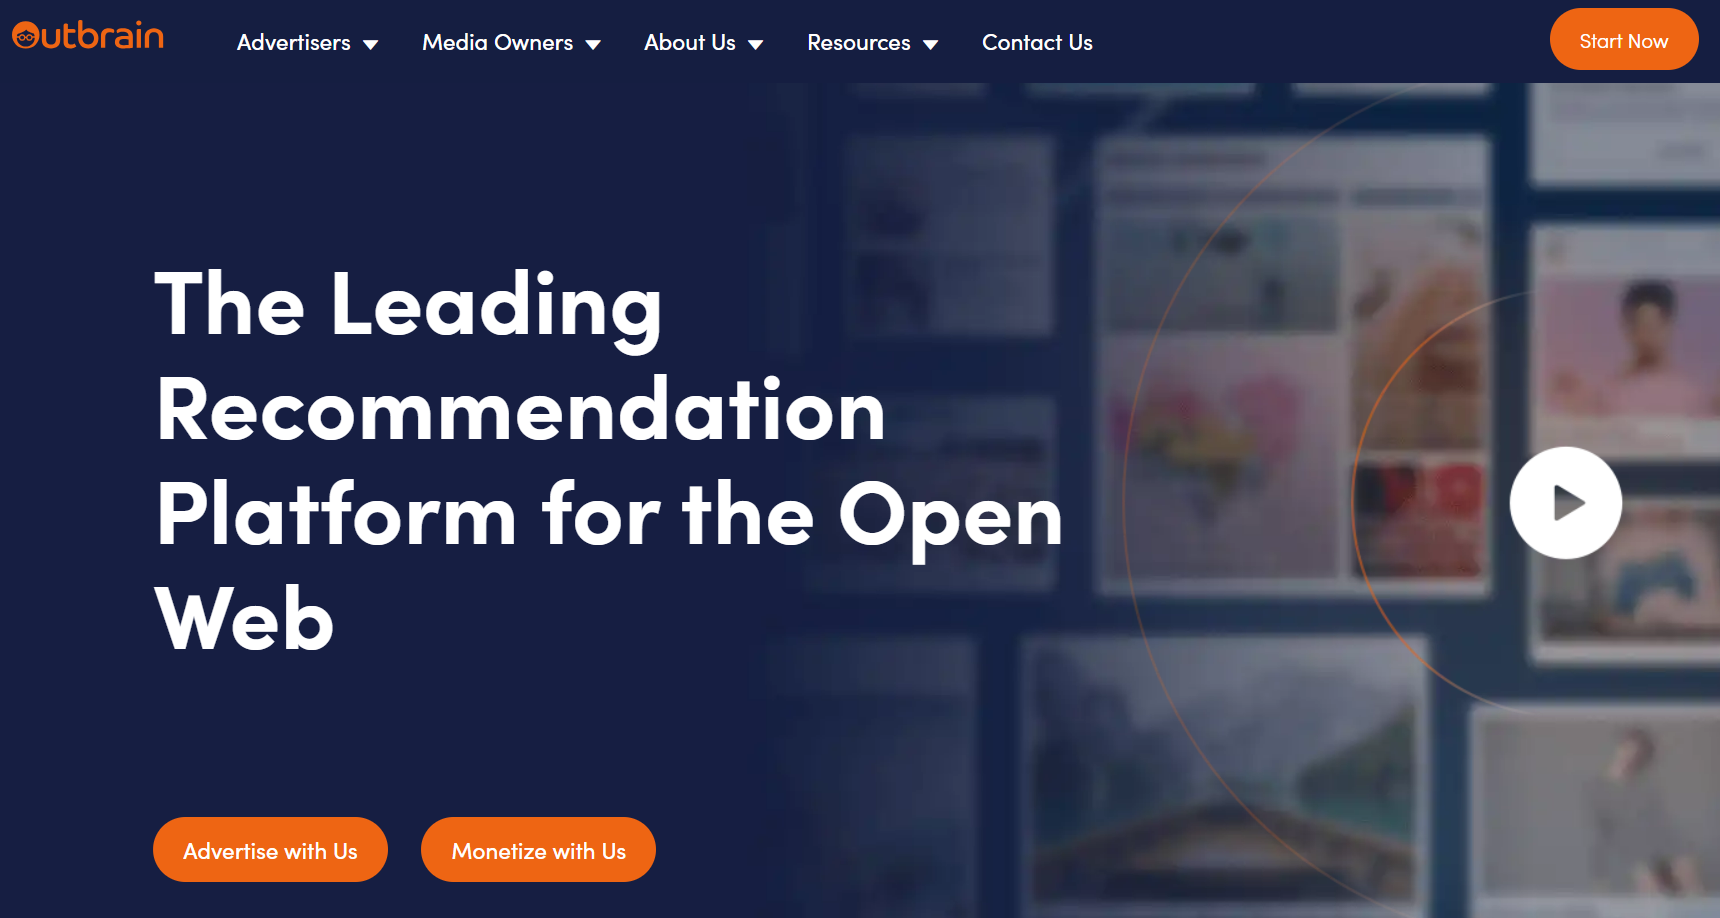 Outbrain: Platform for the Open Web